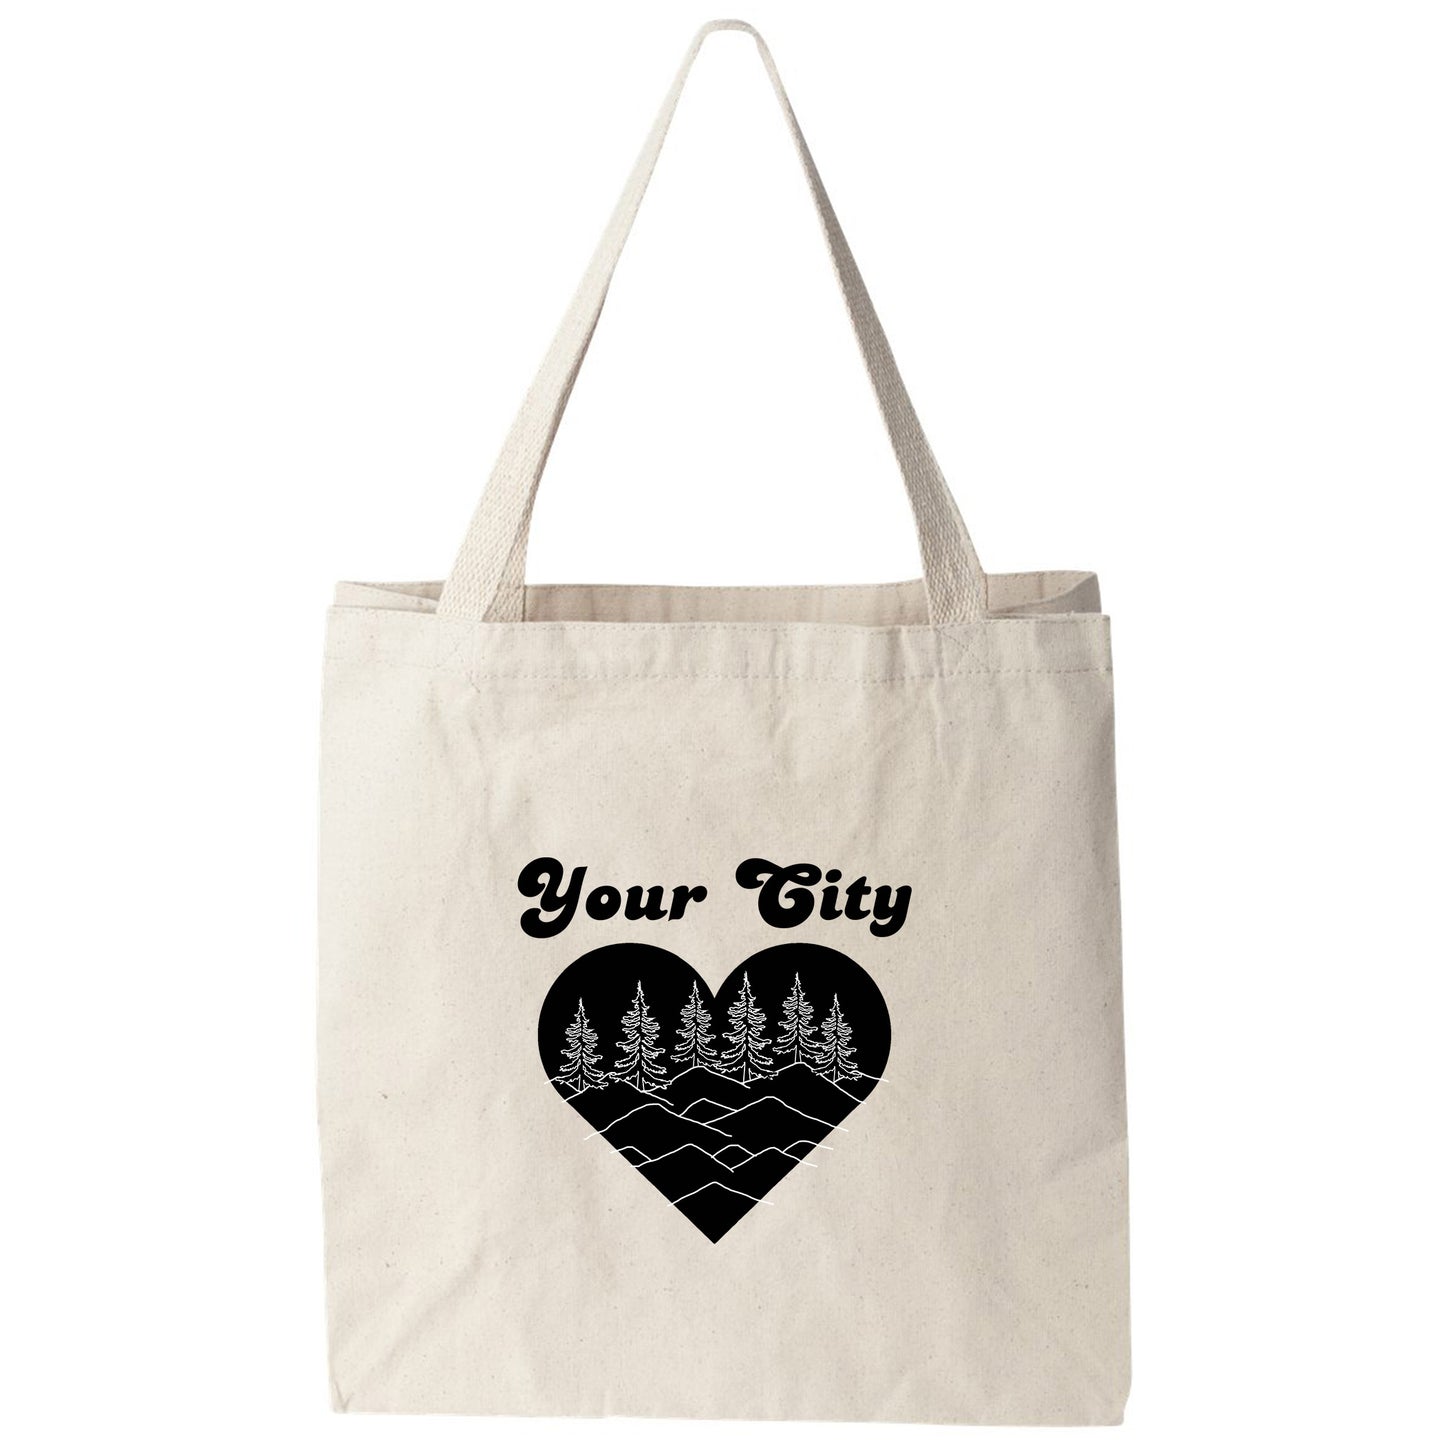 a tote bag with a heart and trees on it